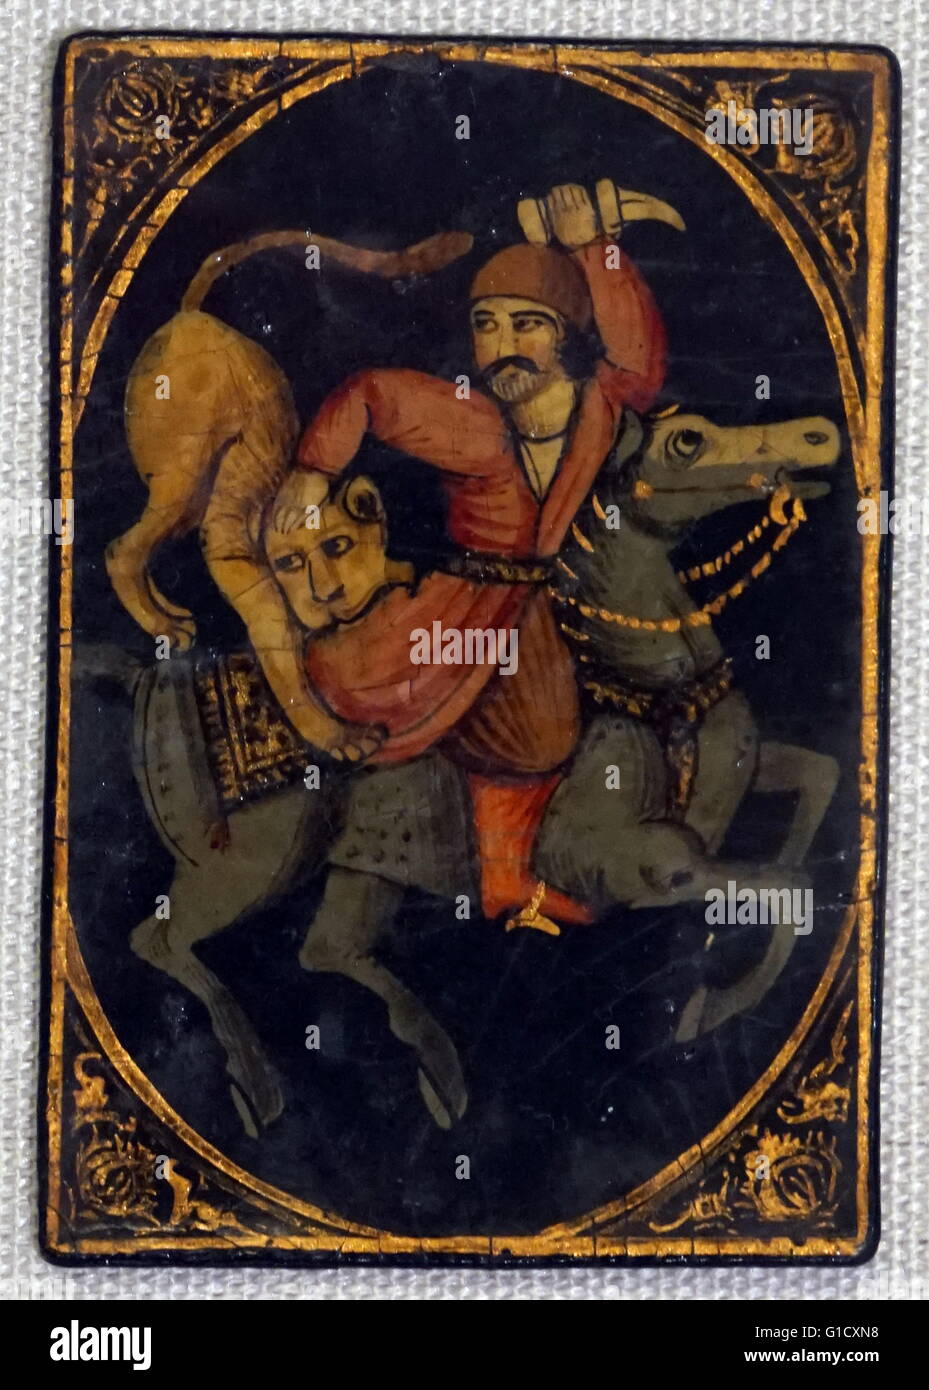 playing card from the Qajar Dynasty. Dated 19th Century Stock Photo